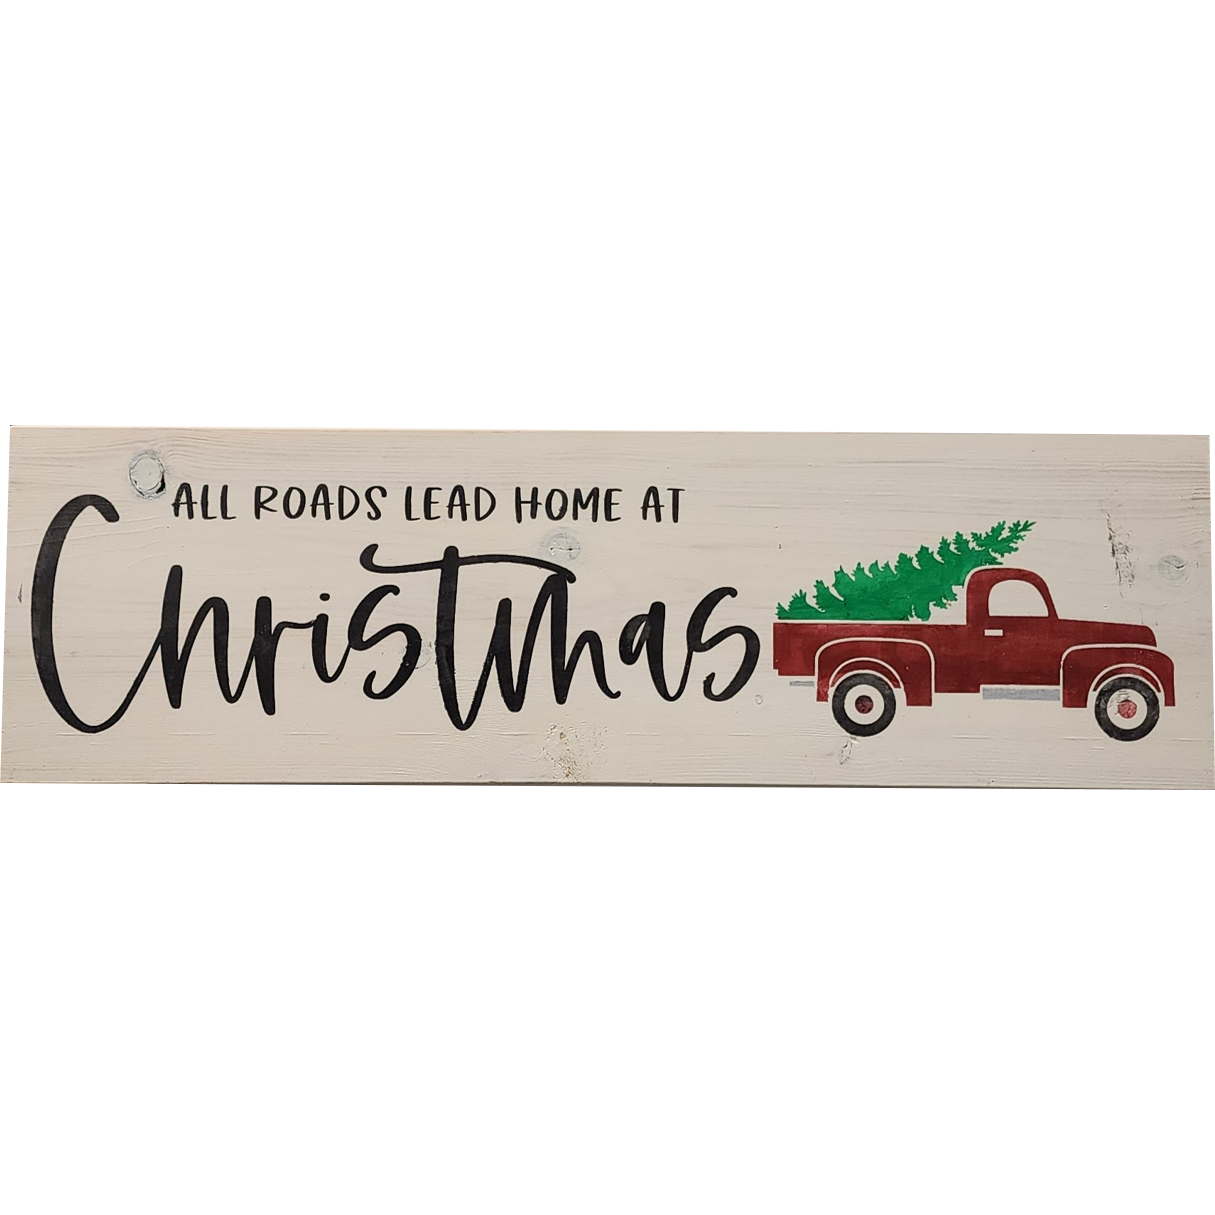 All Roads Lead to Home at Christmas